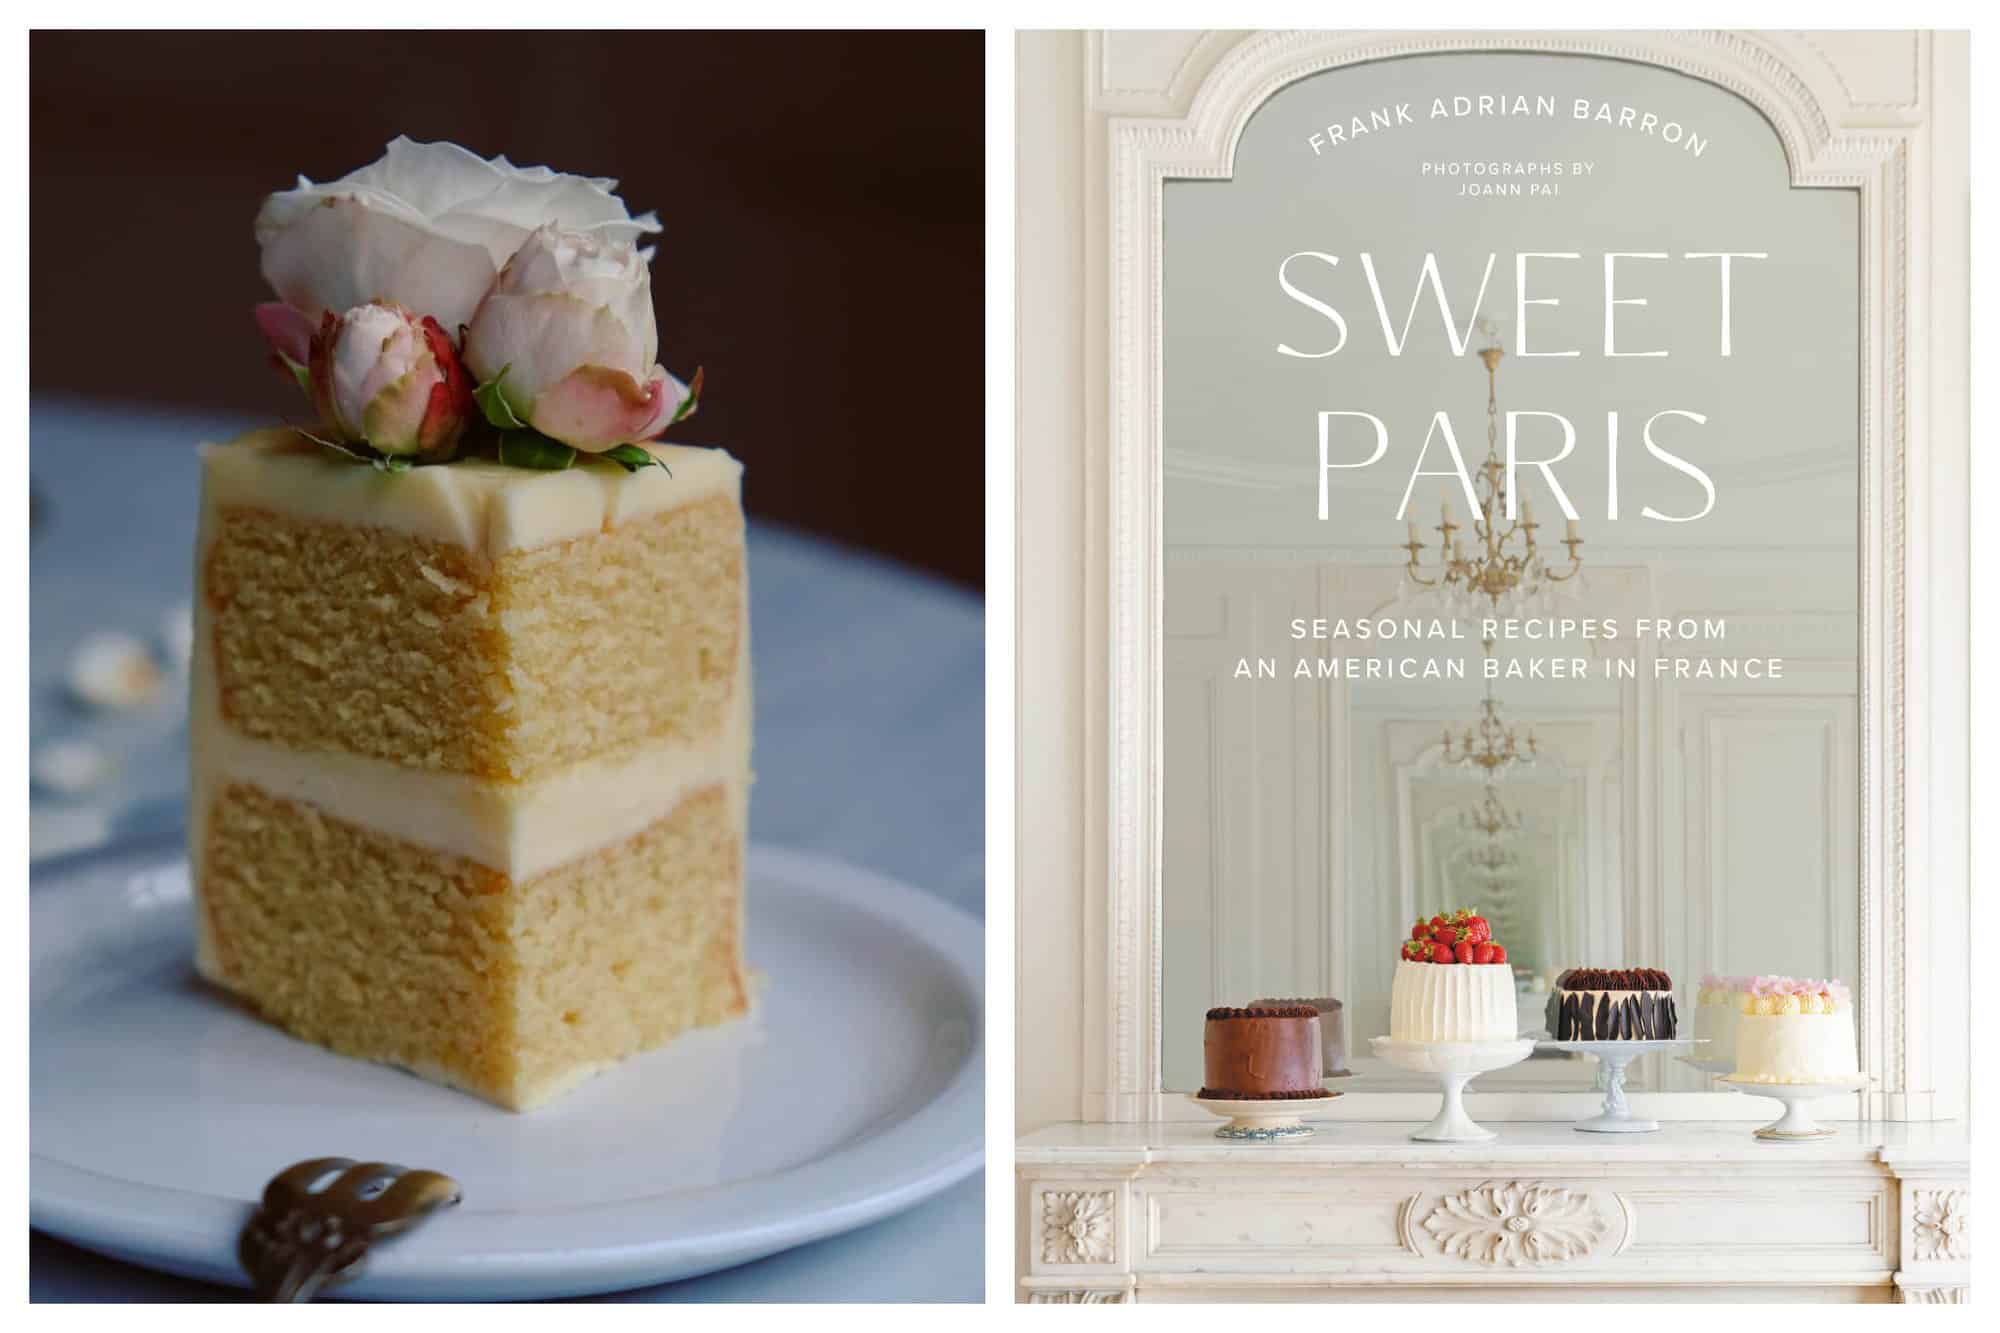 Left: A slice of cake is shown with pale colored roses on top. Right: The cover of Sweet Paris. 